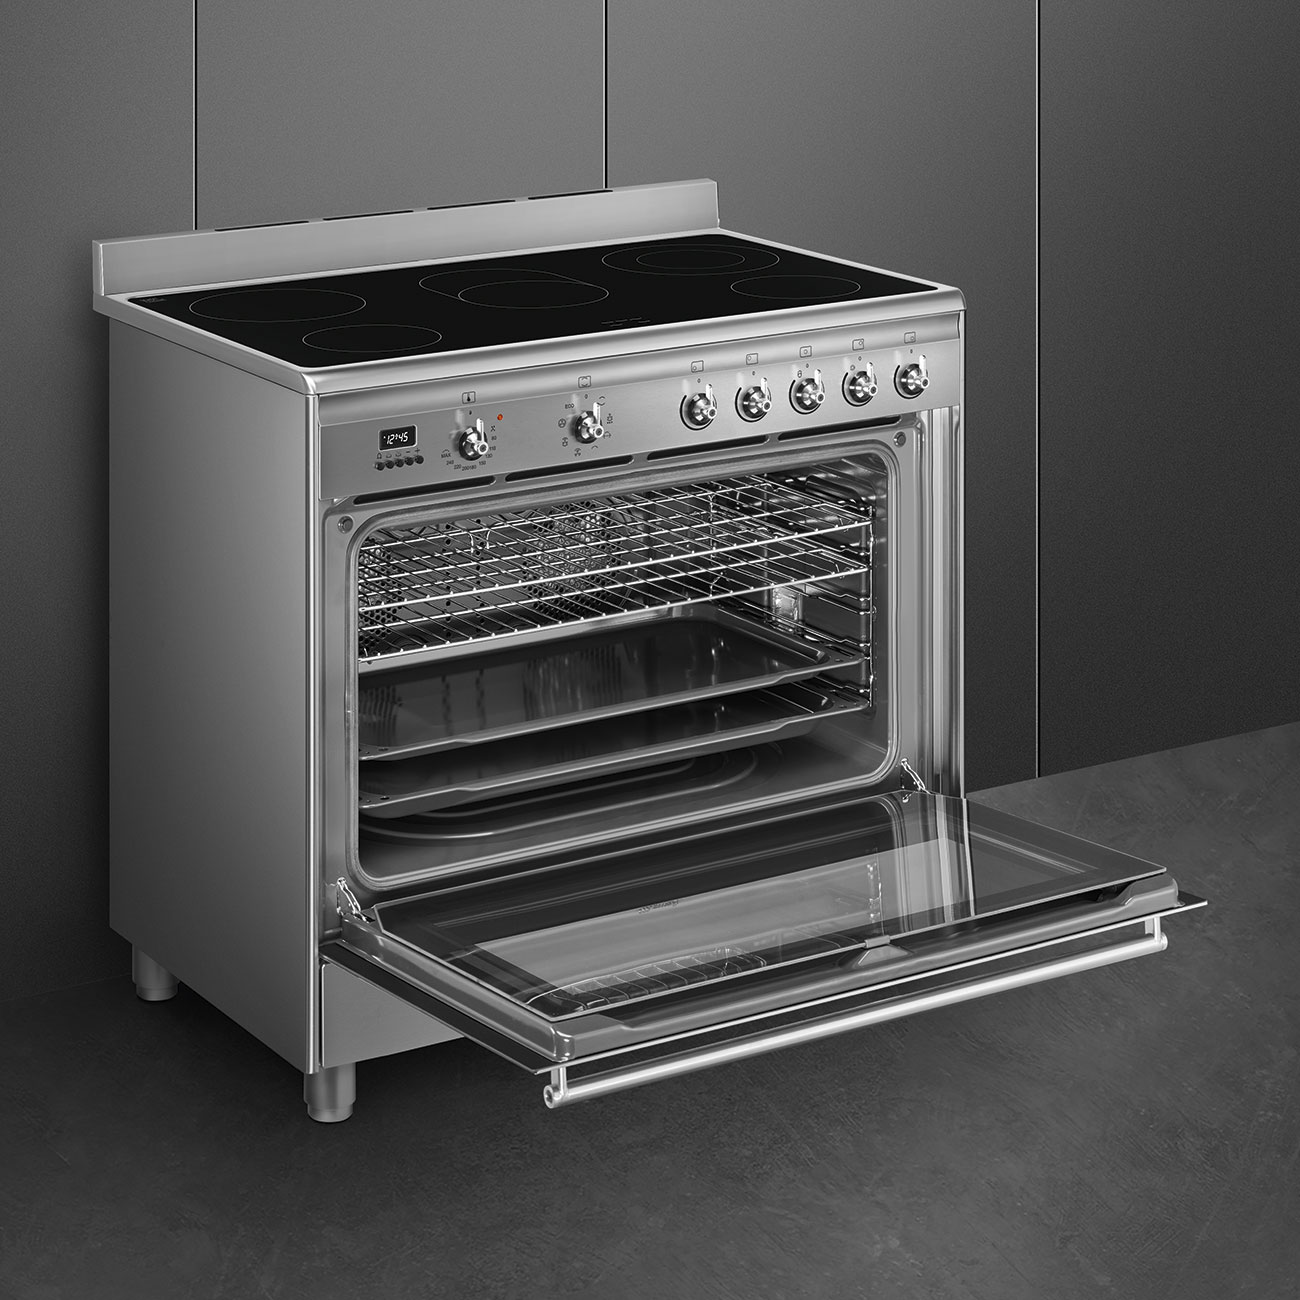 Smeg Stainless steel Cooker with Ceramic Hob_5